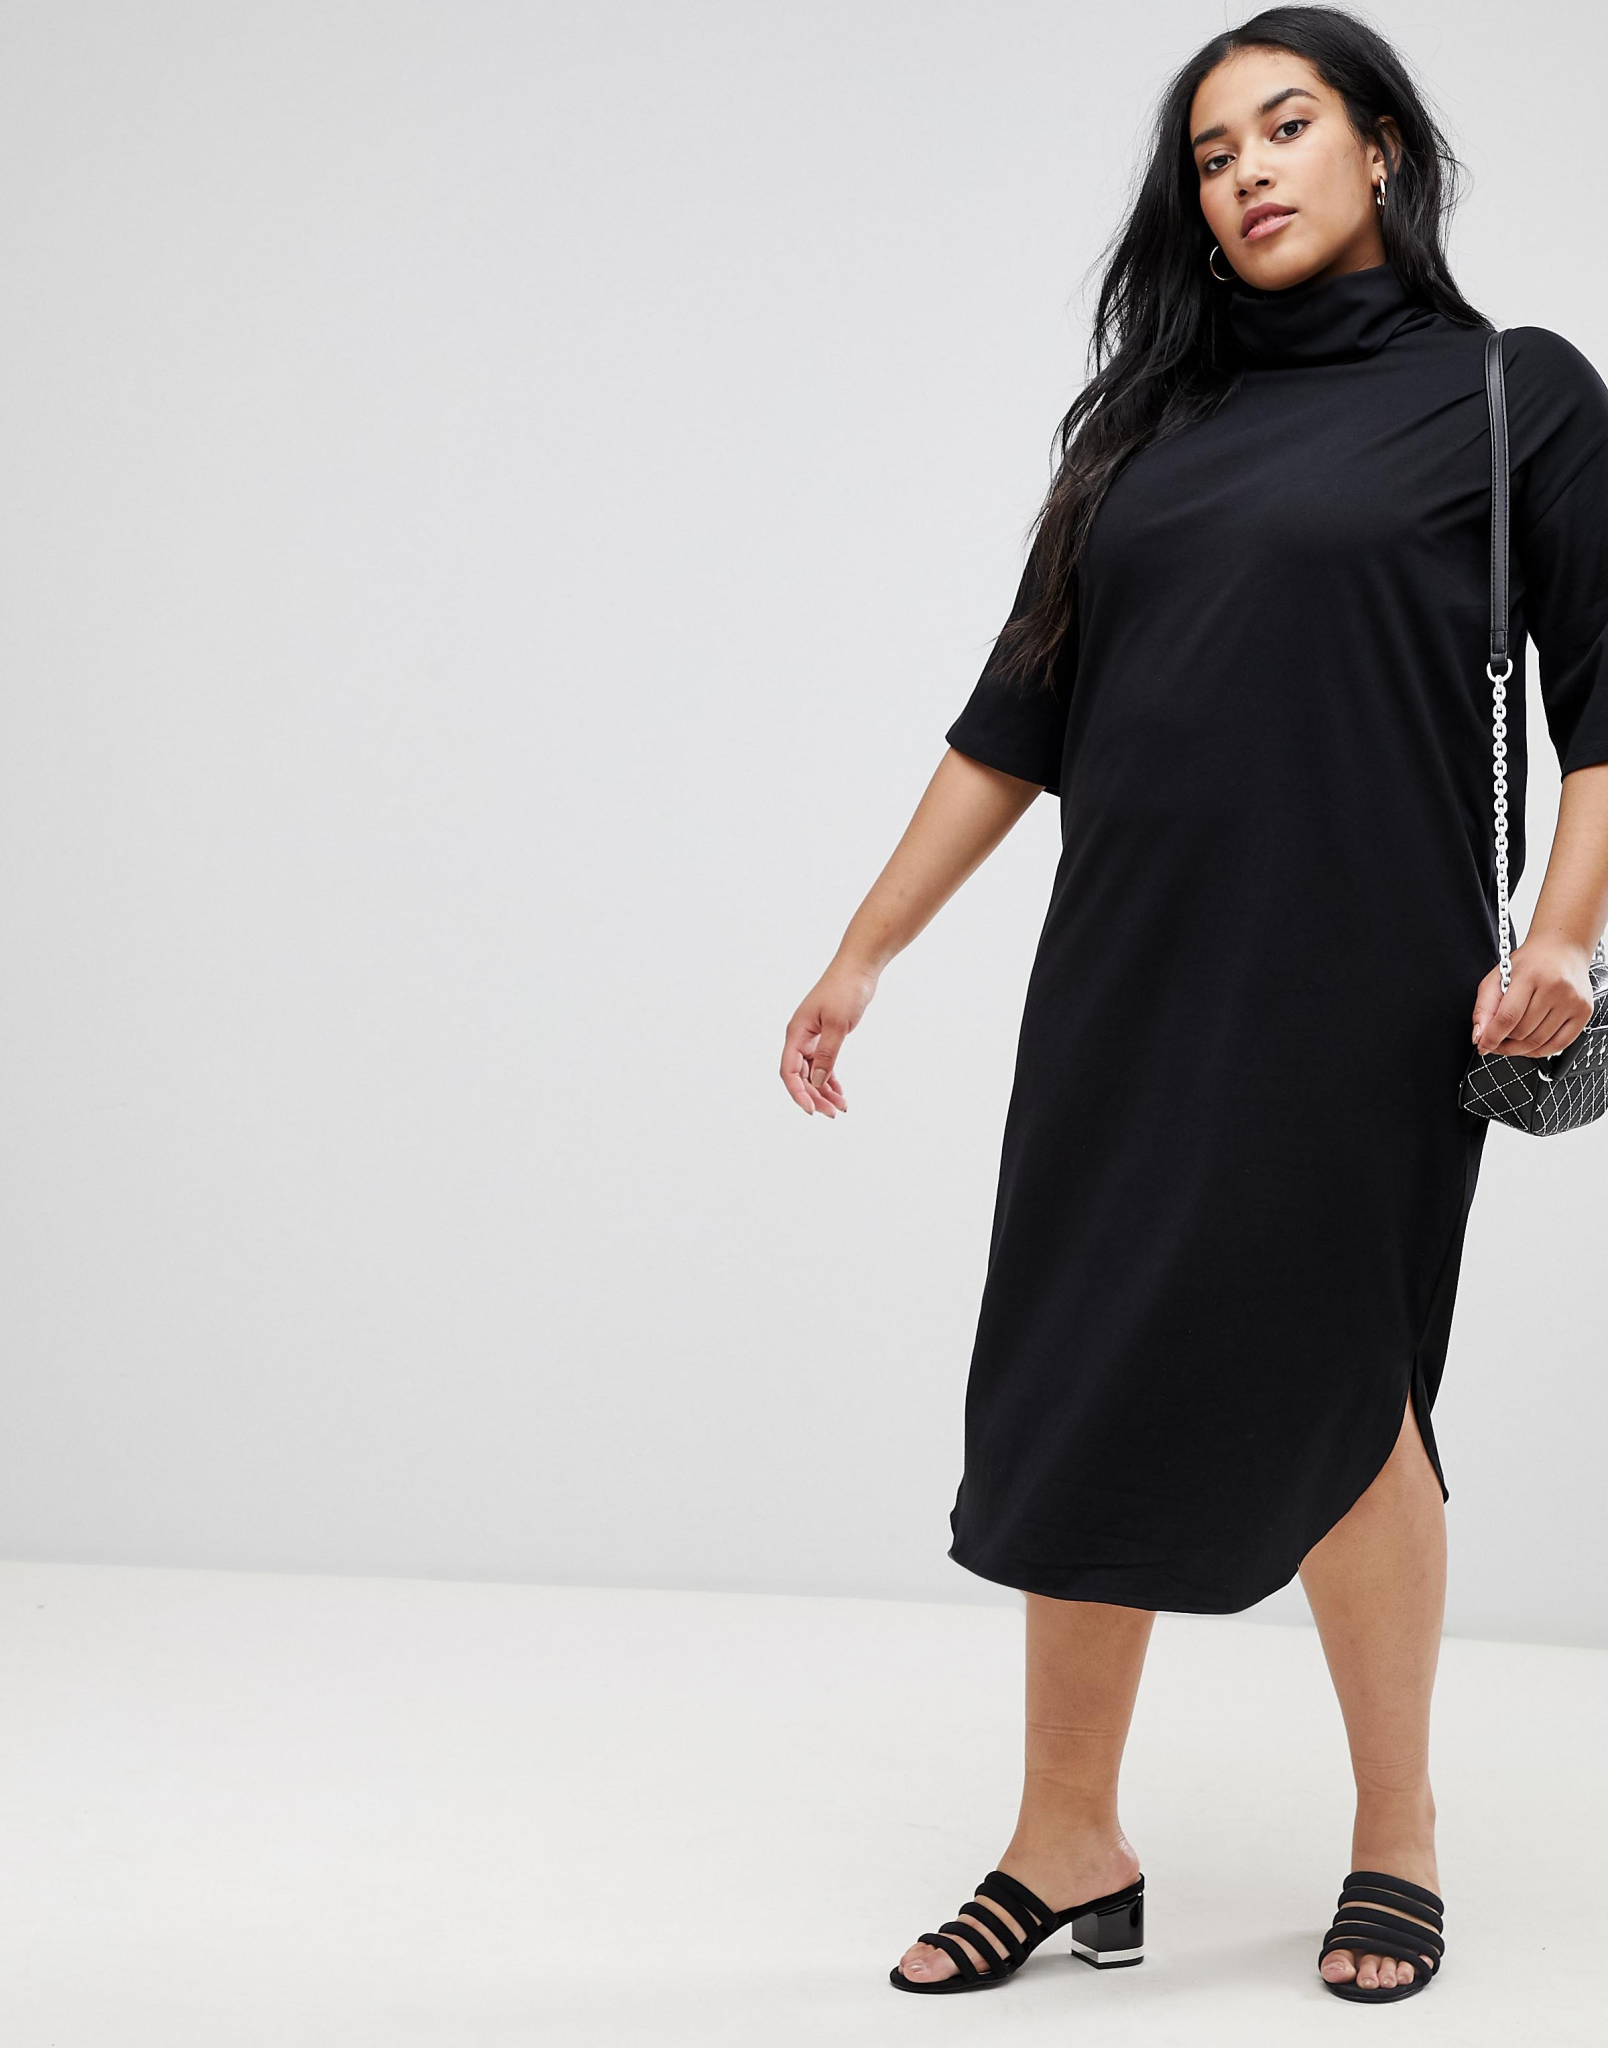 22 sweater dresses to fight the cold in this winter